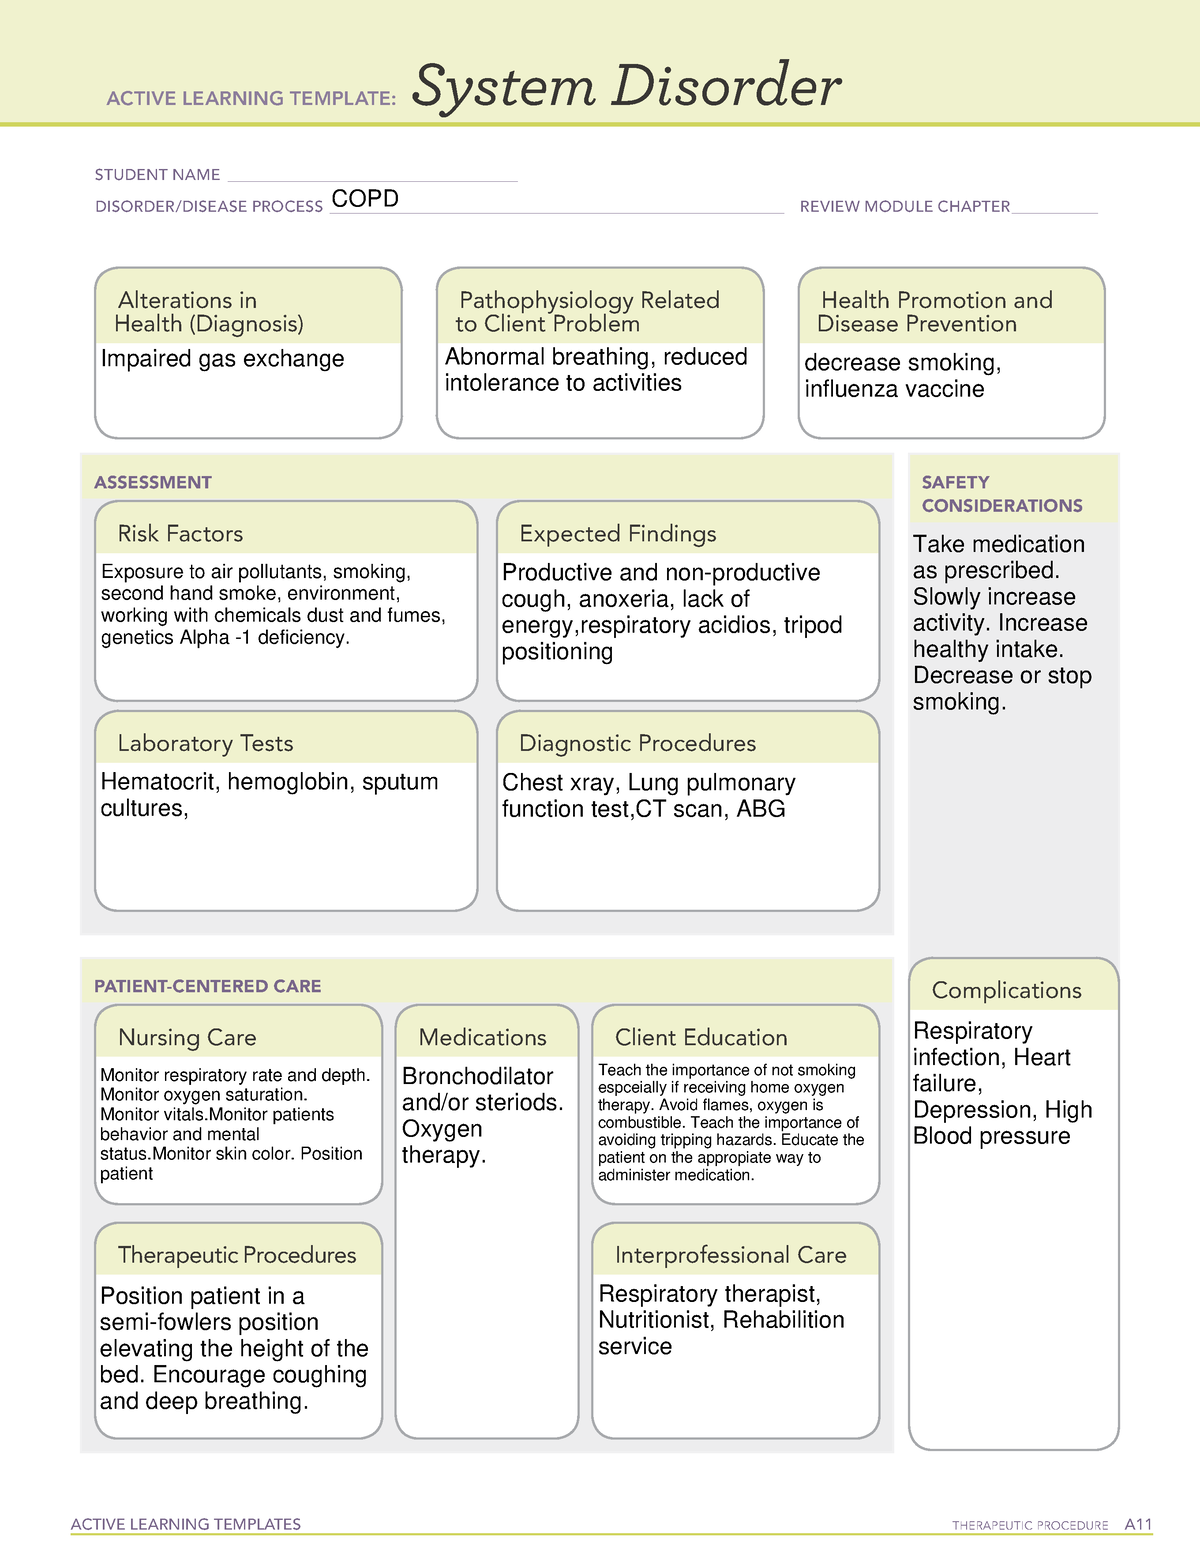 copd-disease-template-active-learning-templates-therapeutic